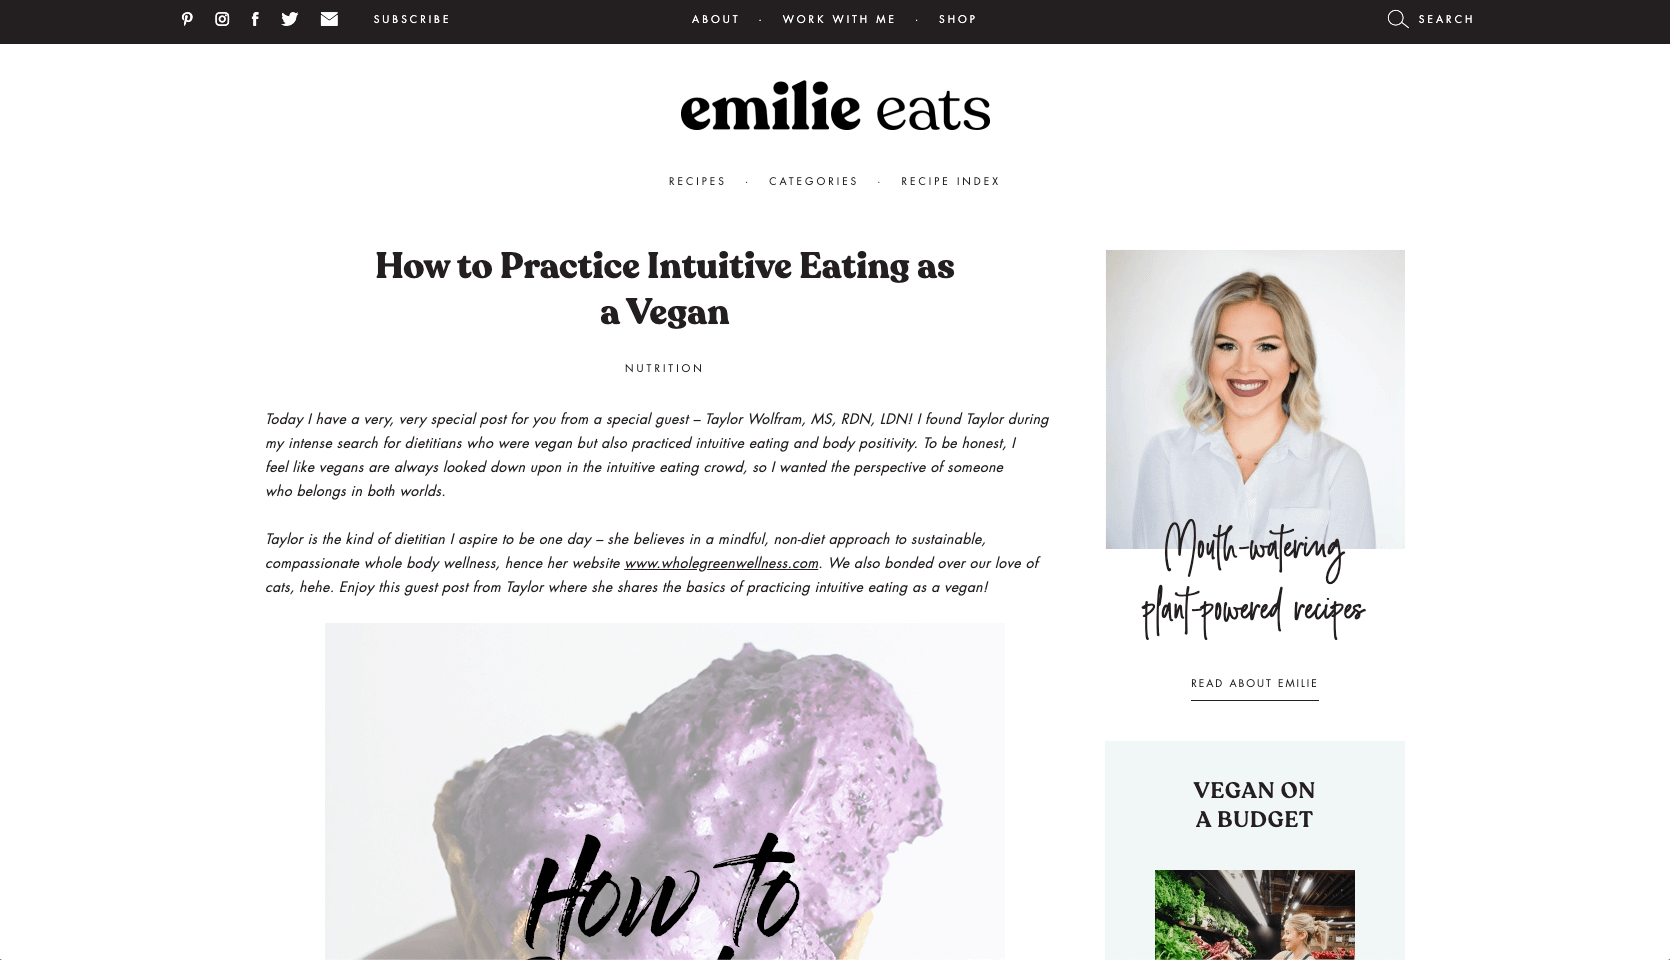 How to Practice Intuitive Eating as a Vegan